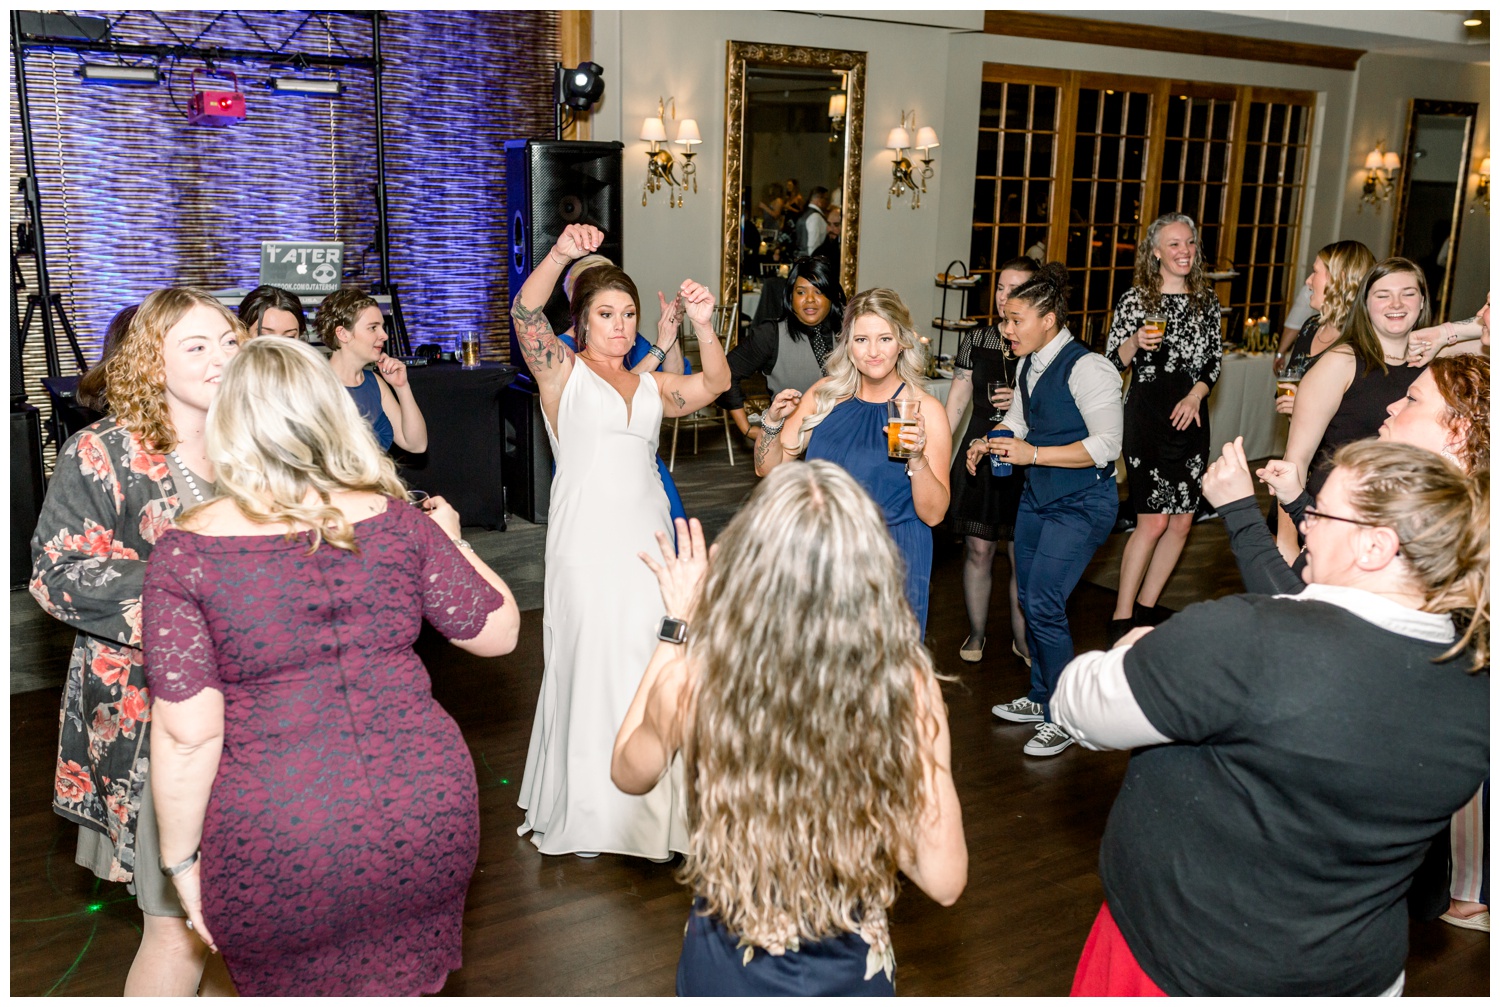 Dancing at The Madison Event Center Wedding Reception